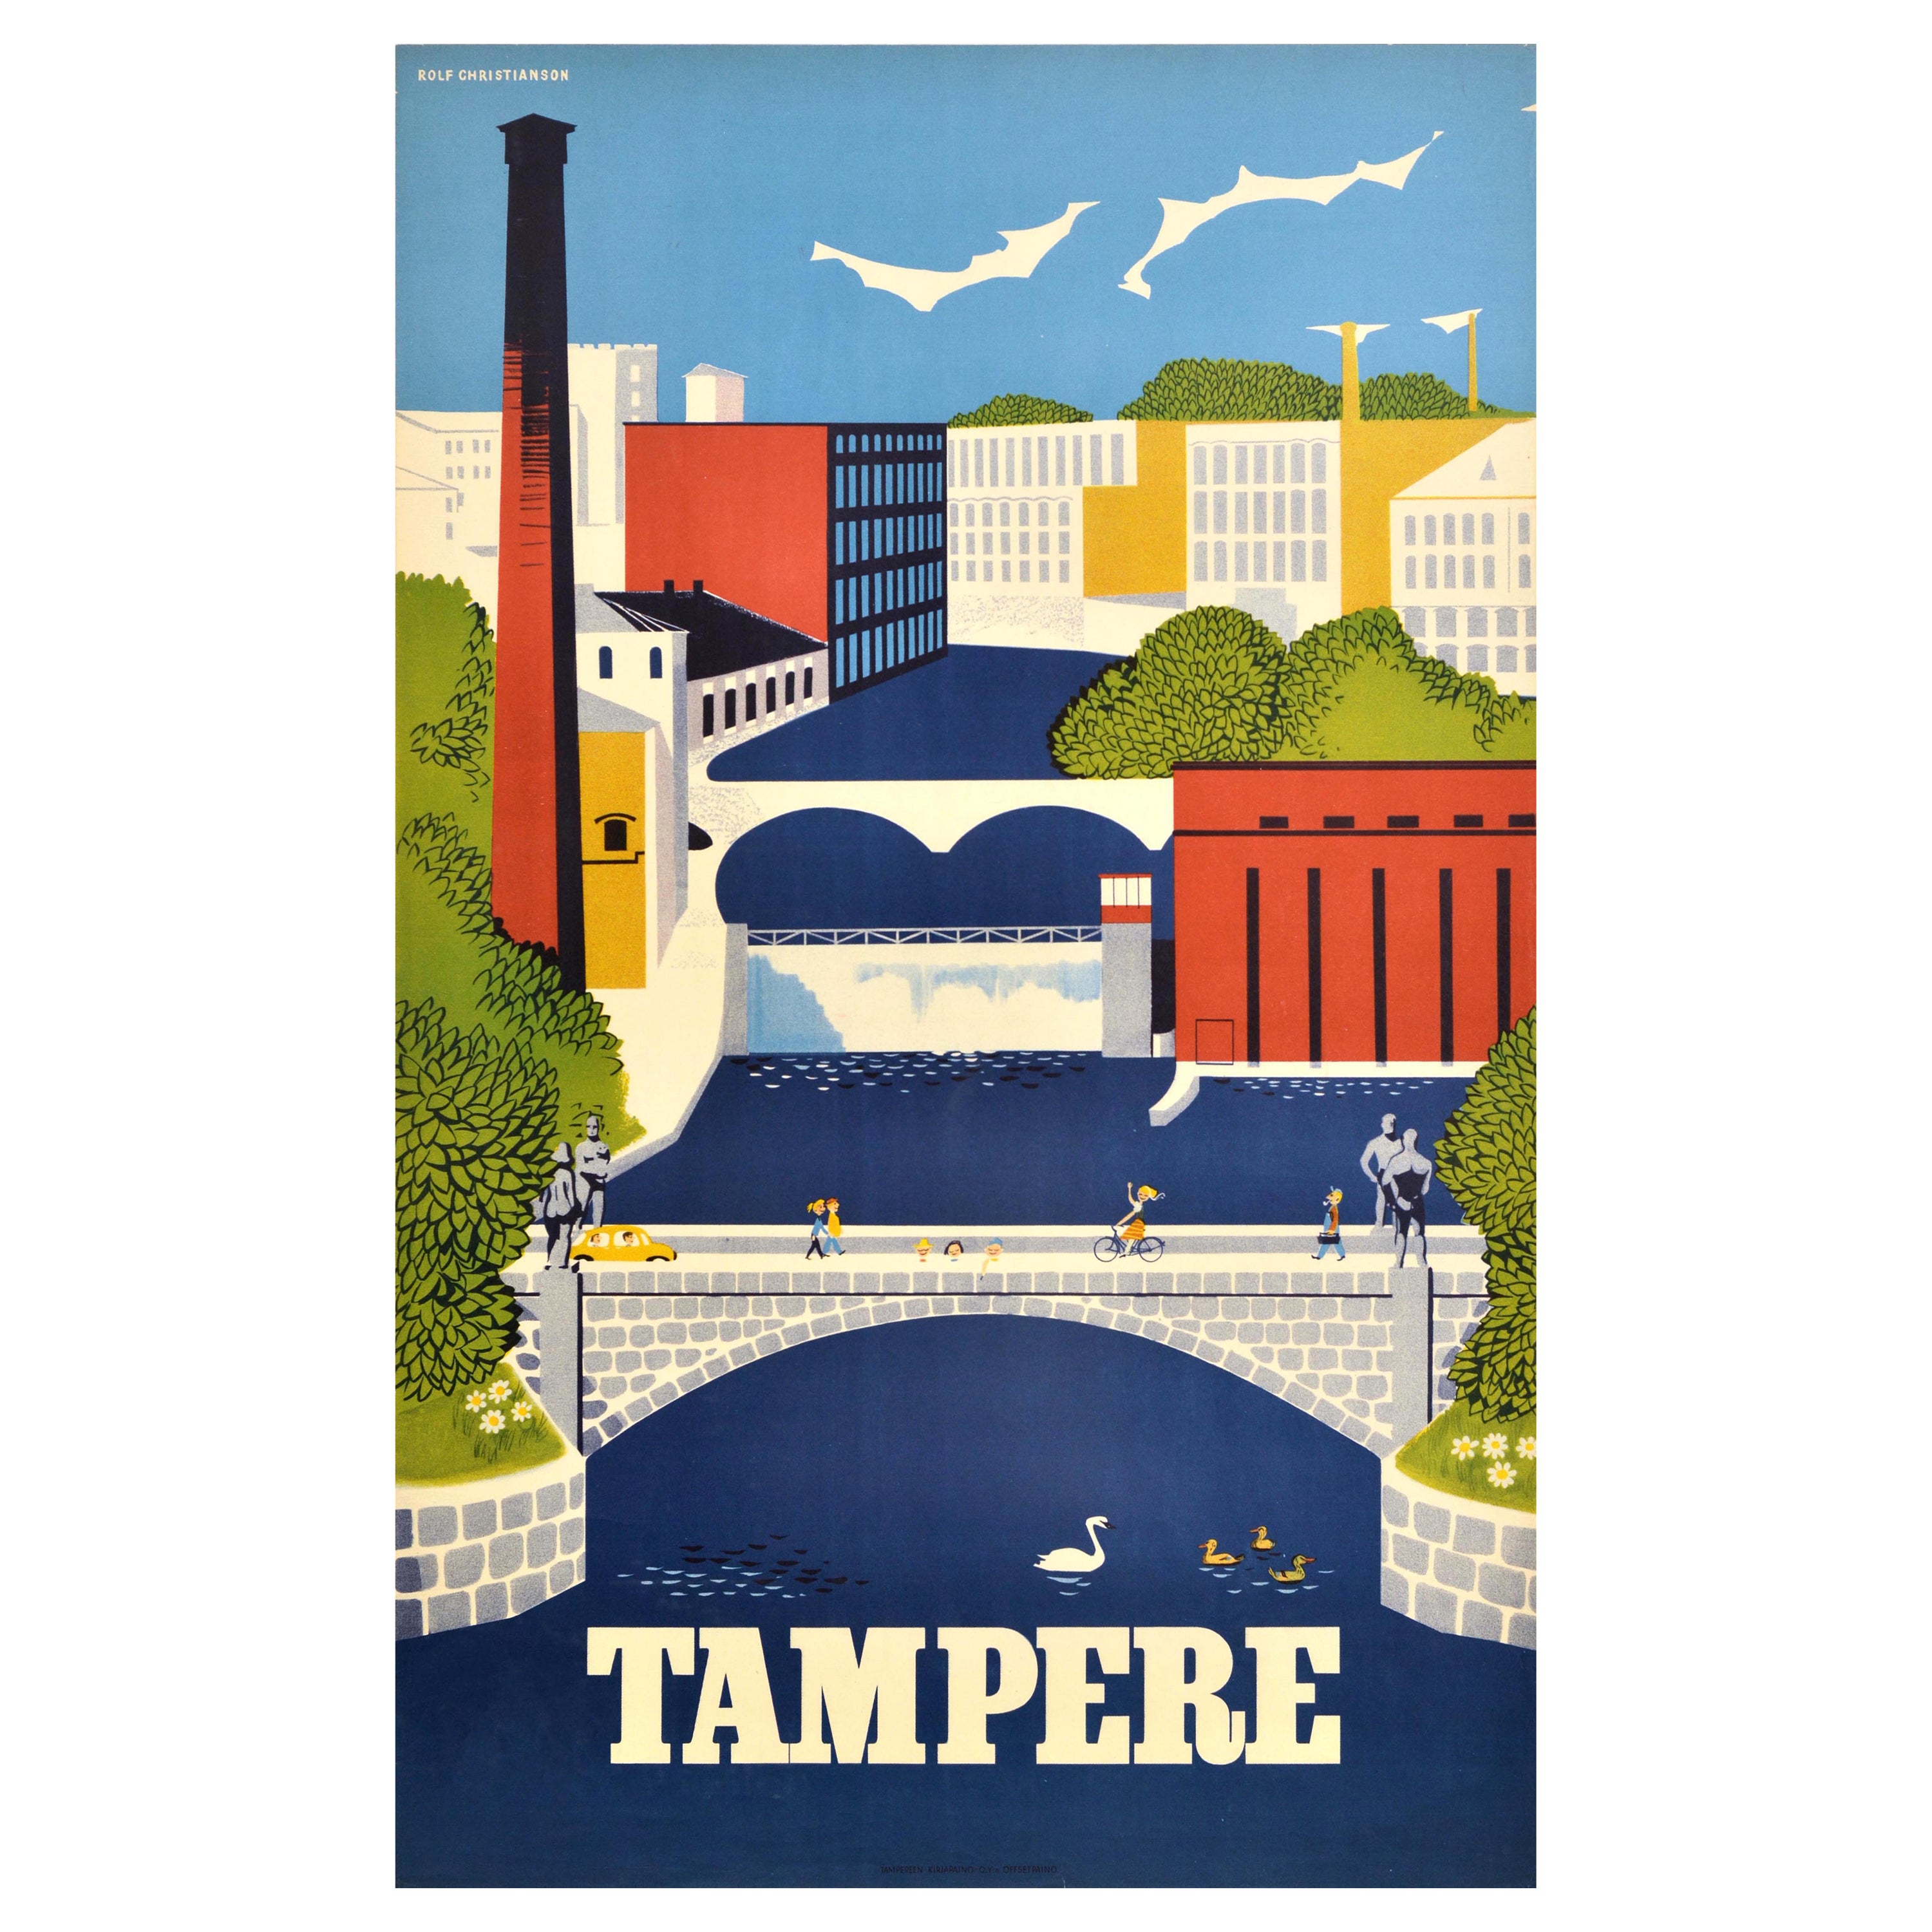 Original Vintage Travel Poster Tampere Finland Rolf Christianson Suomi Nordic For Sale